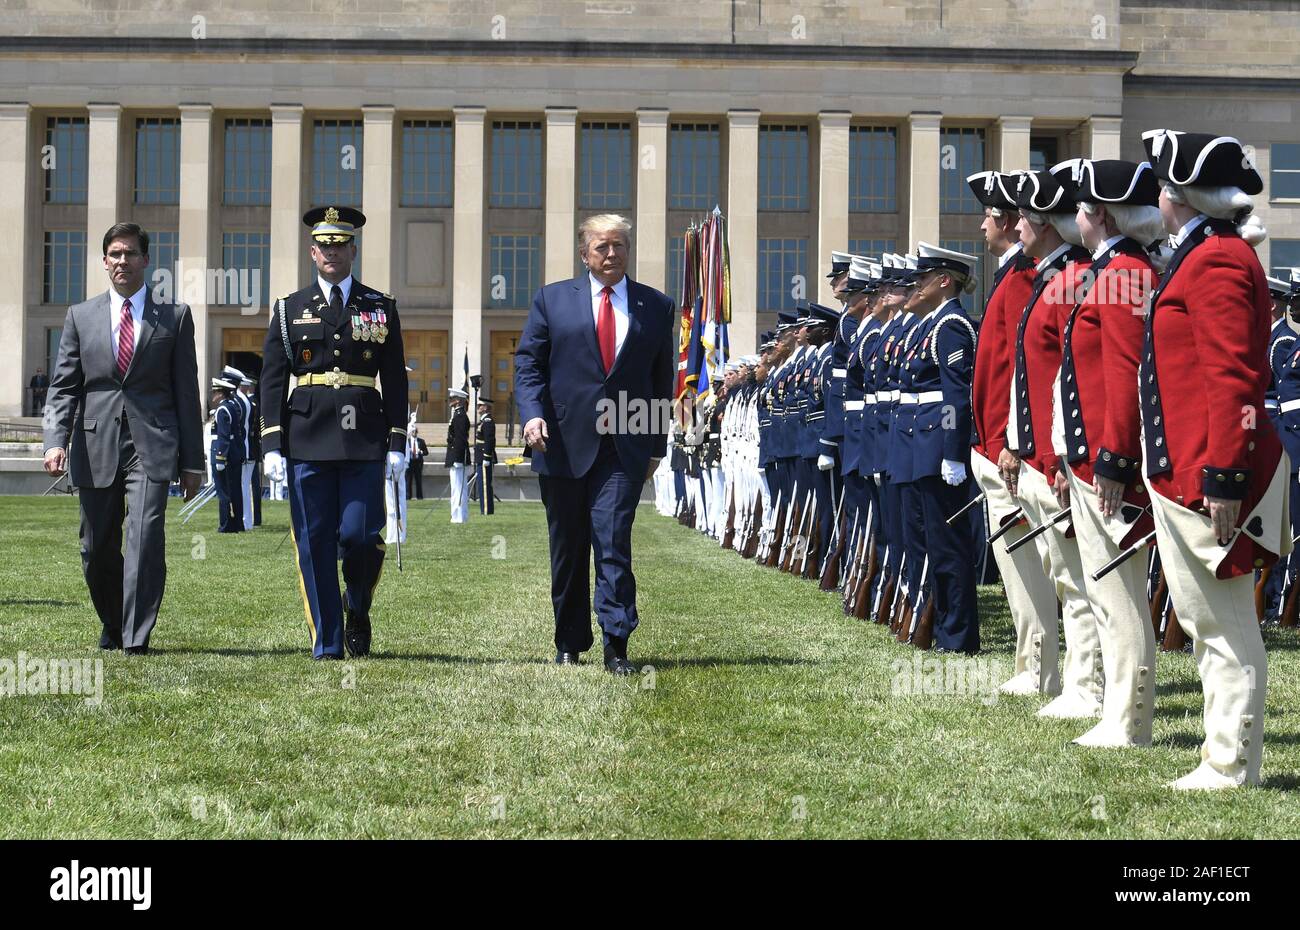 Washington, United States. 12th Dec, 2019. President Donald Trump (R) reviews troops with the new Secretary of Defense Mark Esper (L) and Vice Chairman of the Joint Chiefs of Staff Gen. Paul Selva, at the Pentagon, on July 25, 2019, Washington, DC The Department of Defense has been without a full-time leader since former Secretary Jim Mattis resigned in December 2018. Photo by Mike Theiler/UPI Credit: UPI/Alamy Live News Stock Photo